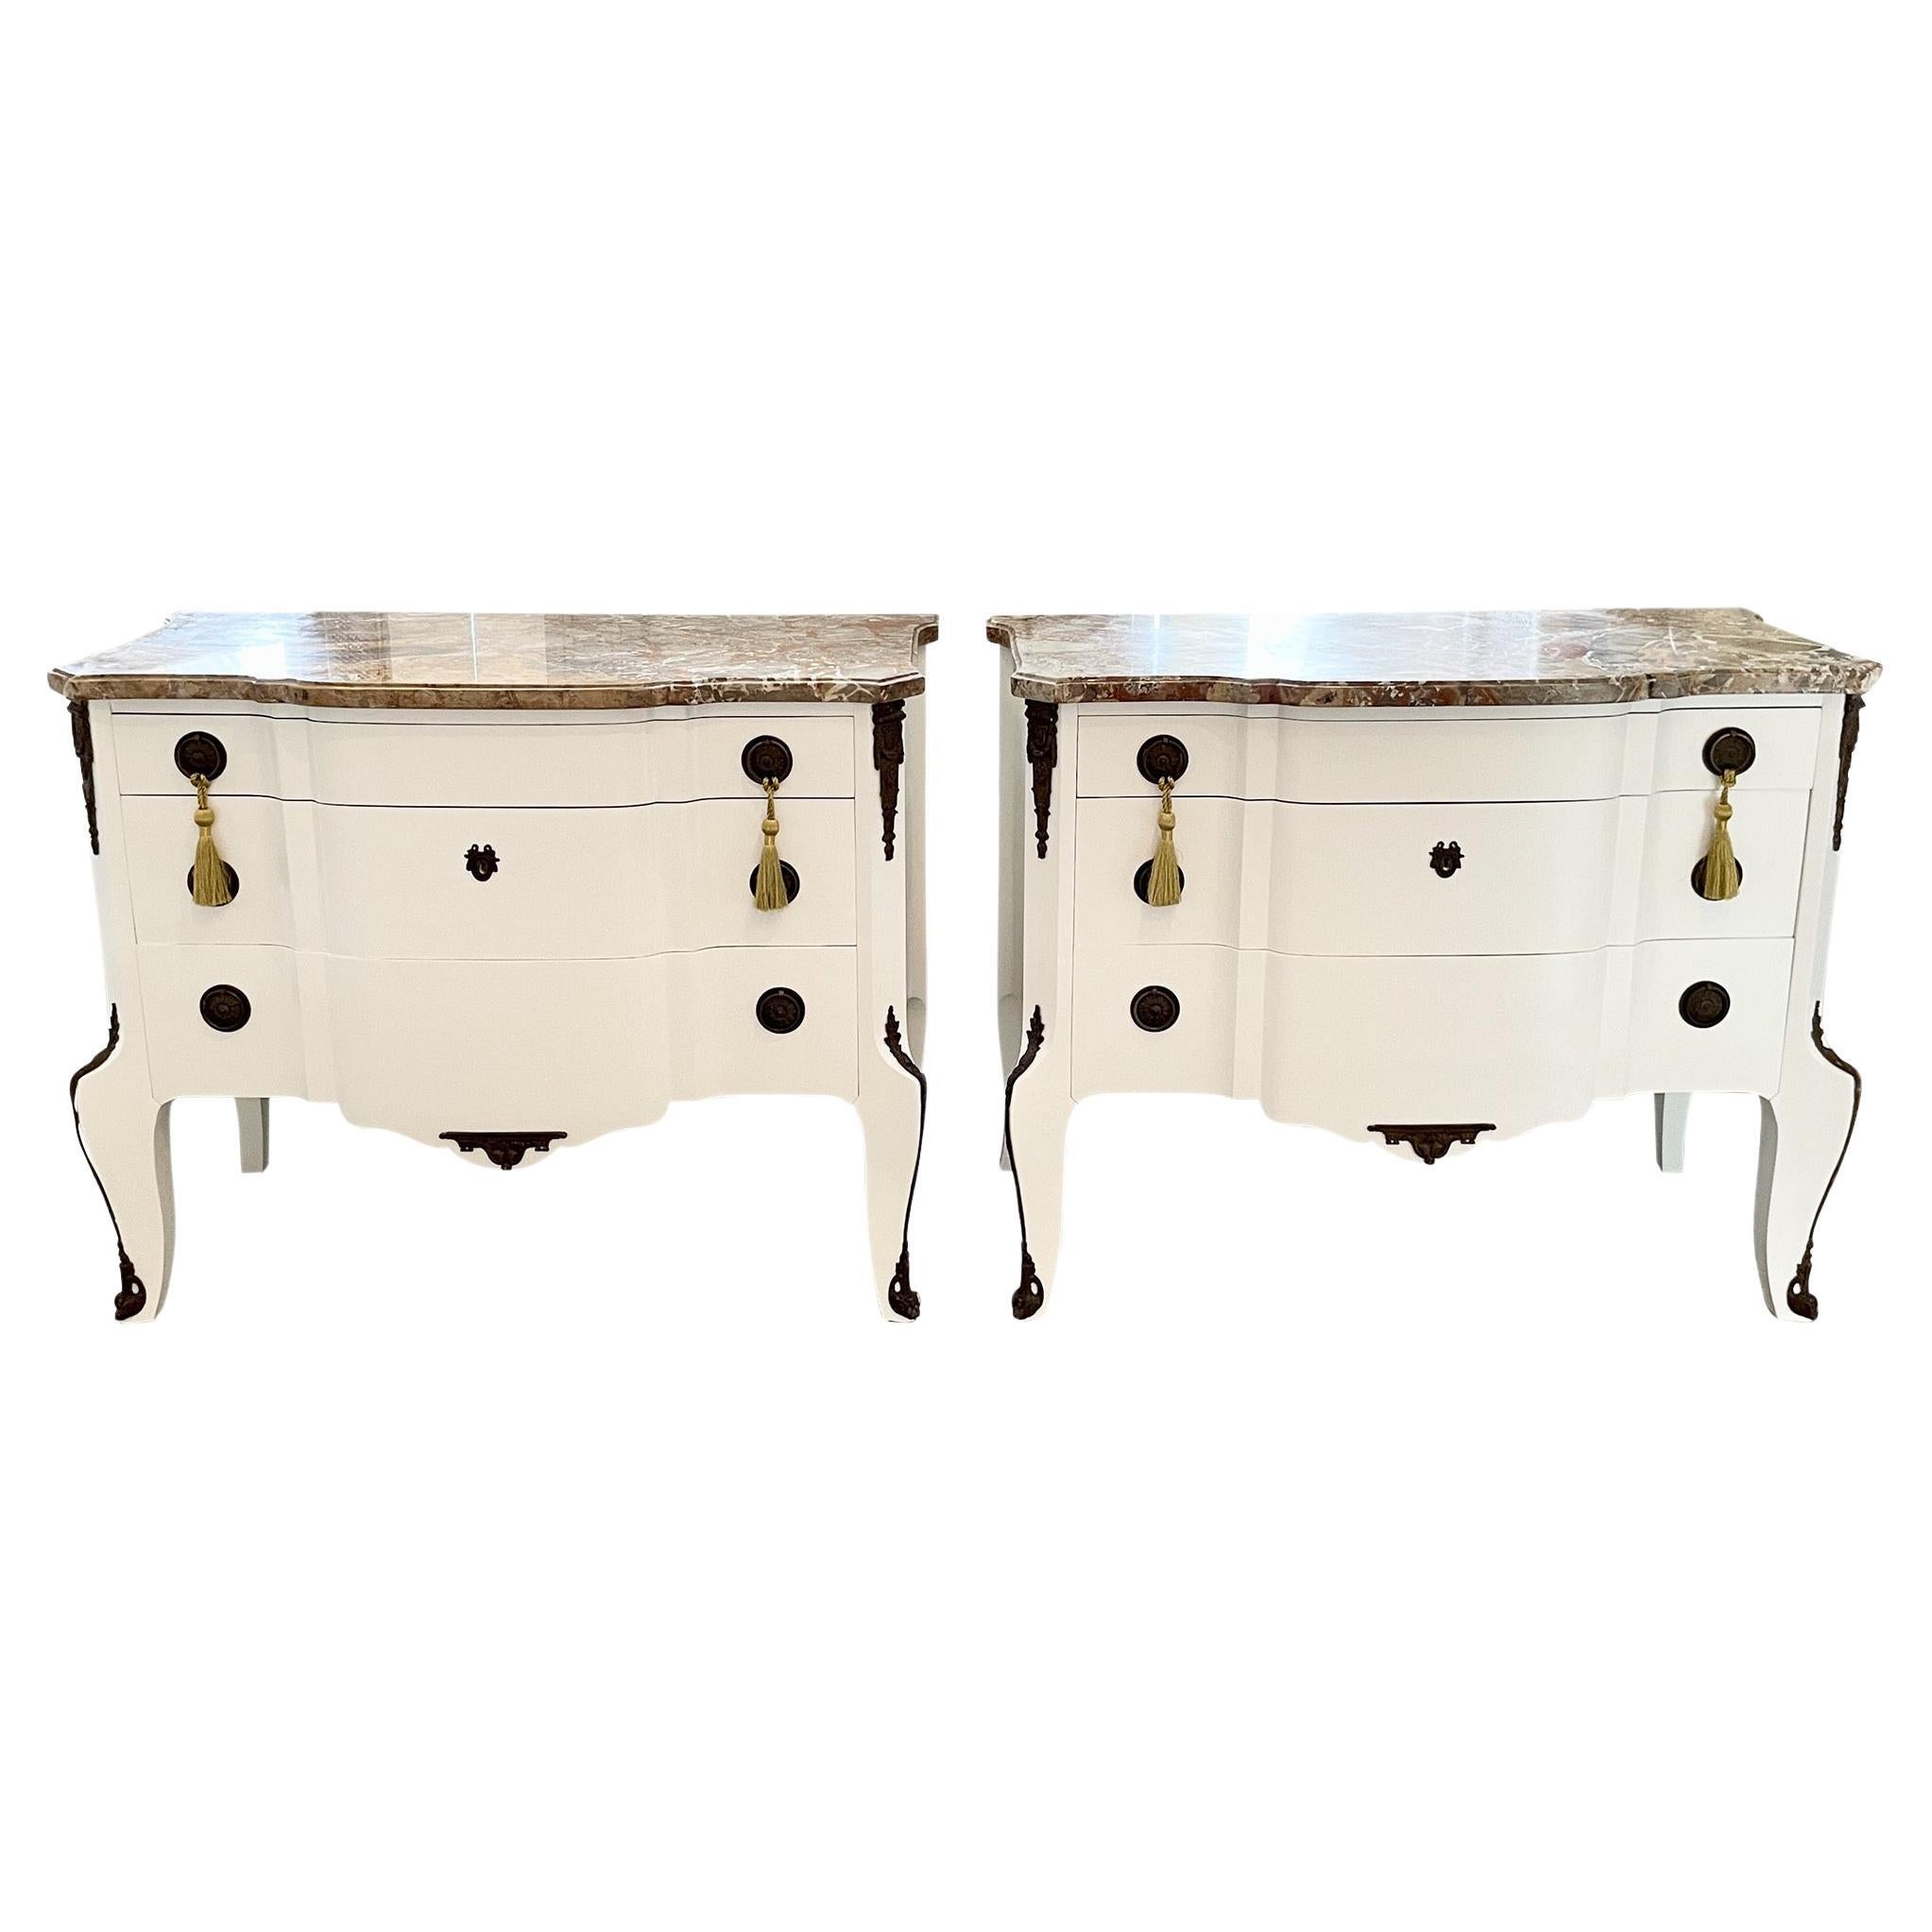 French Transition Commodes With Original Marble Tops - a Pair For Sale